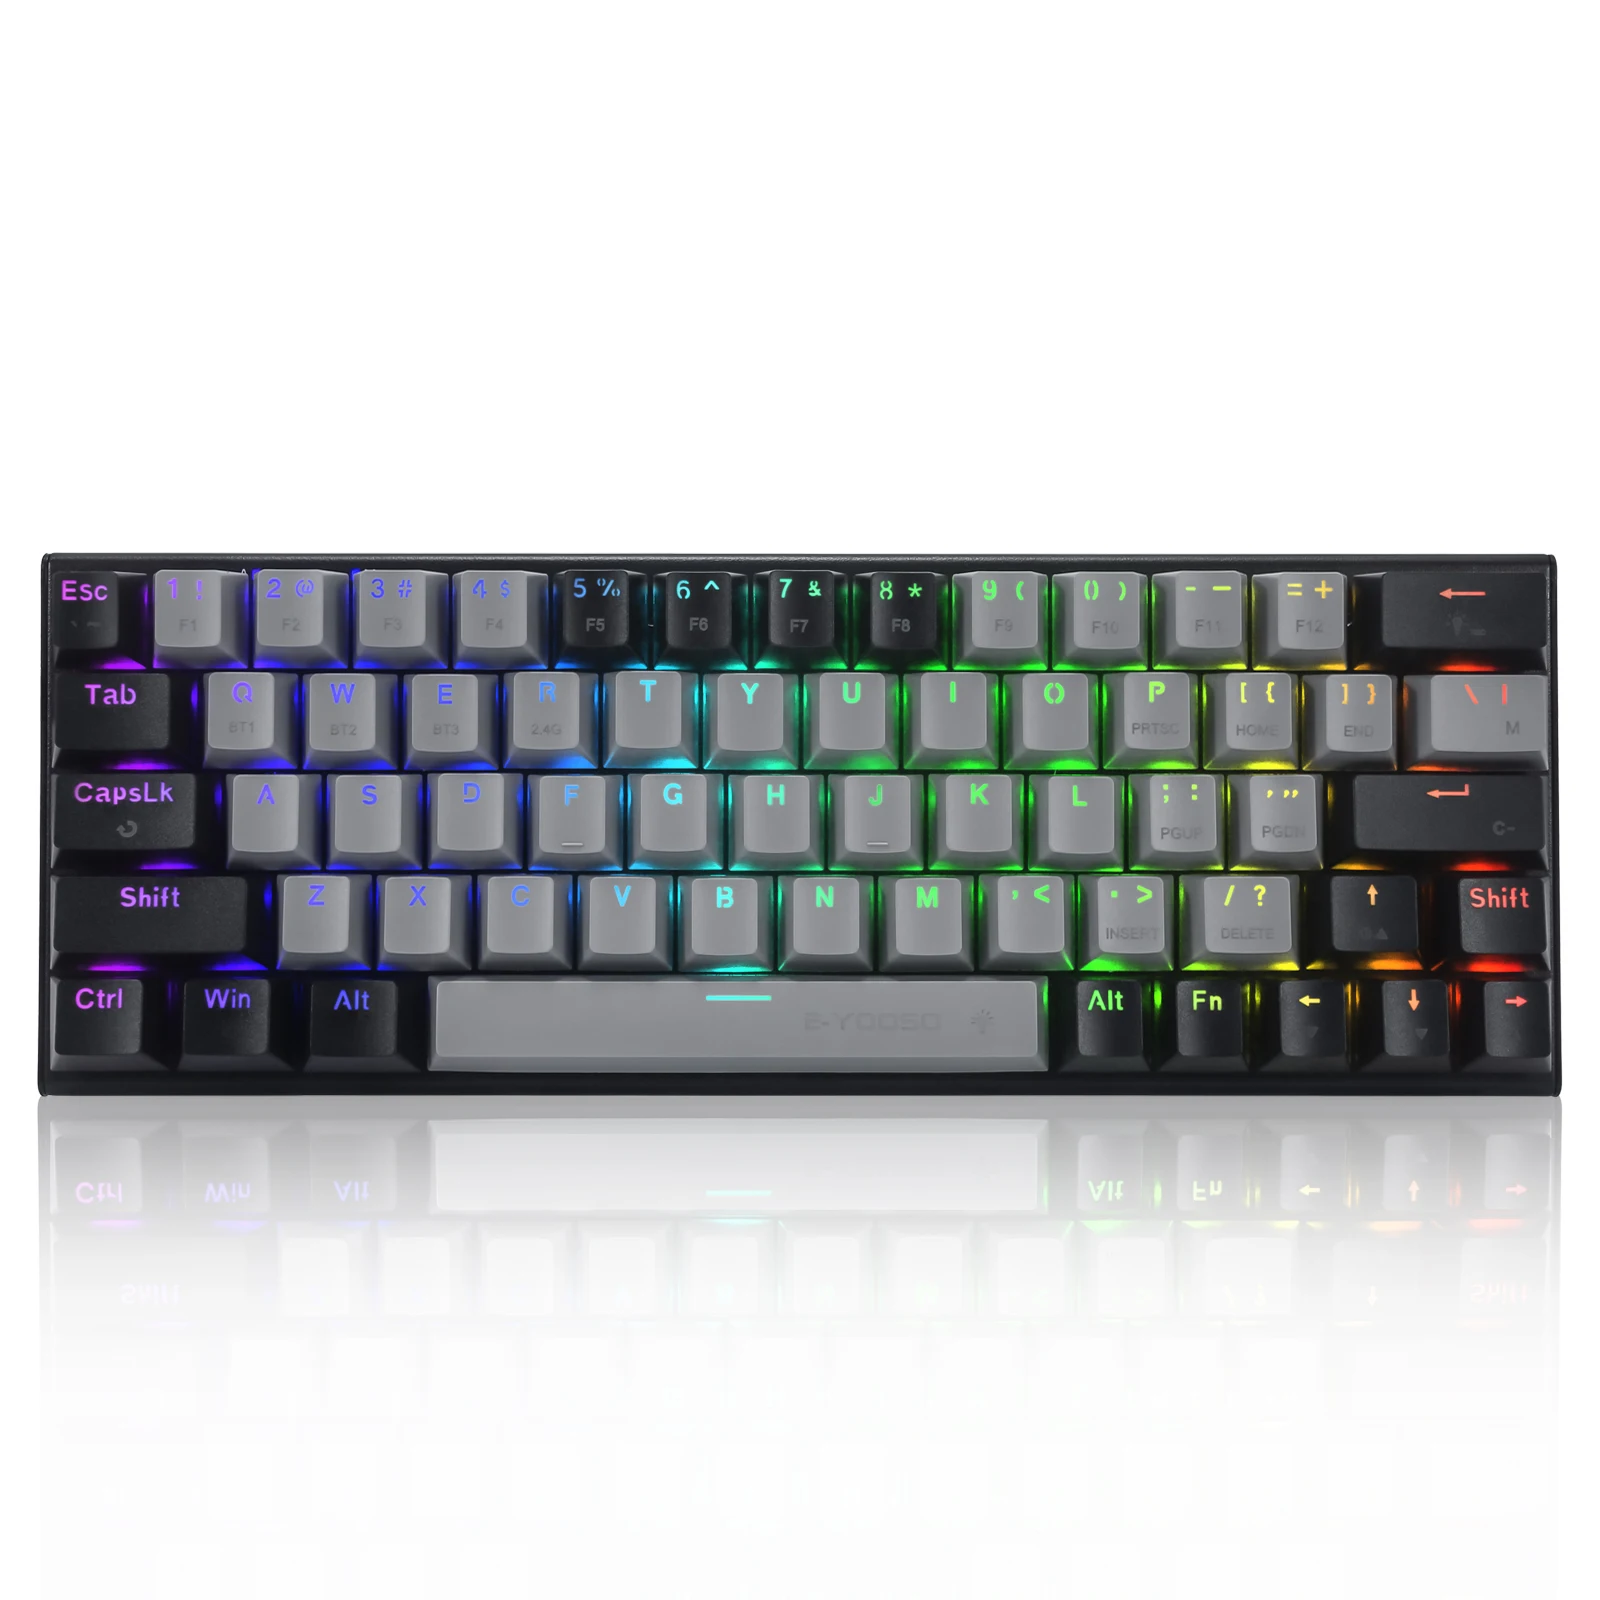 HUOJI Z11 63keys RGB Mechanical Gaming Keyboard Surpport Bluetooth/Wireless 2.4G/USB 3 mode with Red switch for PC,Laptop,Mac OS